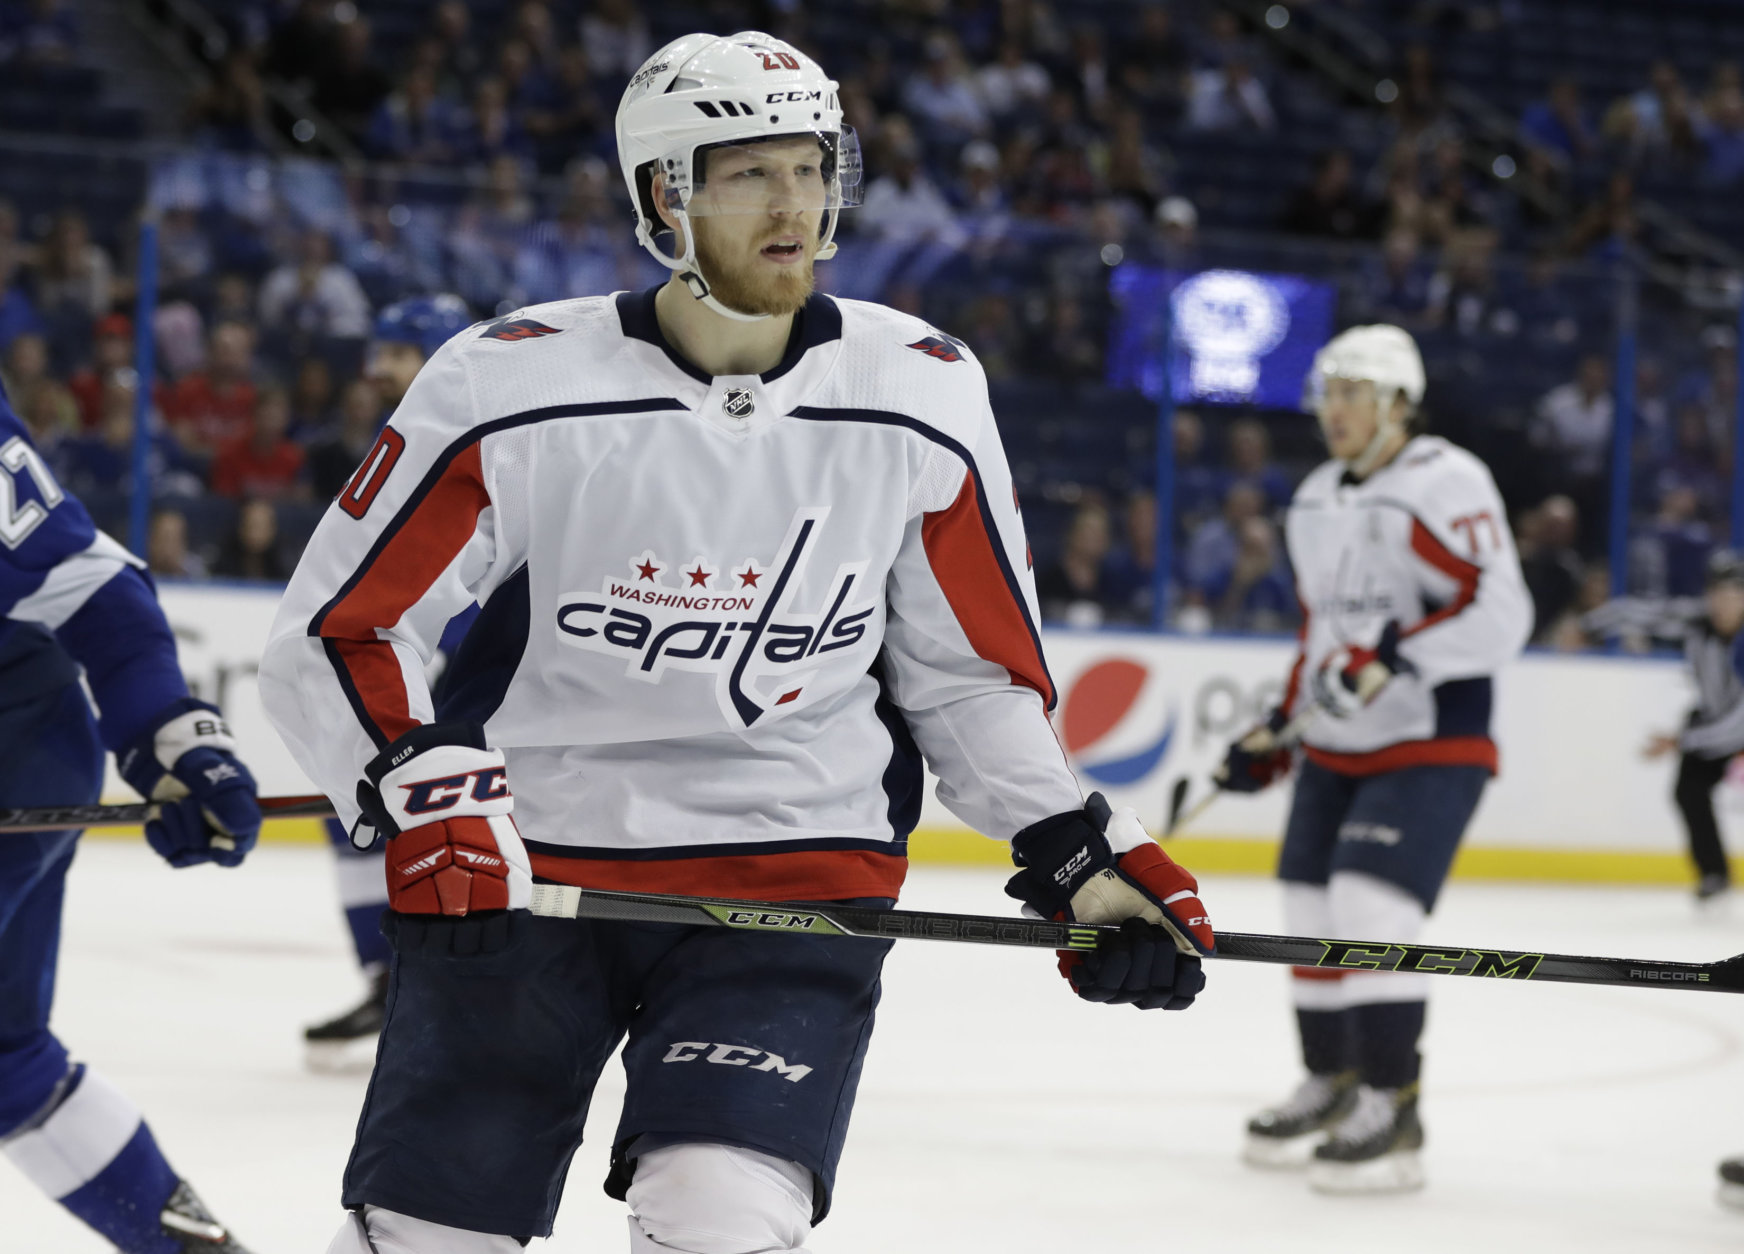 Washington Capitals center Lars Eller (20) during the third period of Game 2 of the NHL Eastern Conference finals hockey playoff series against the Tampa Bay Lightning Sunday, May 13, 2018, in Tampa, Fla. The Capitals won the game 6-2. (AP Photo/Chris O'Meara)